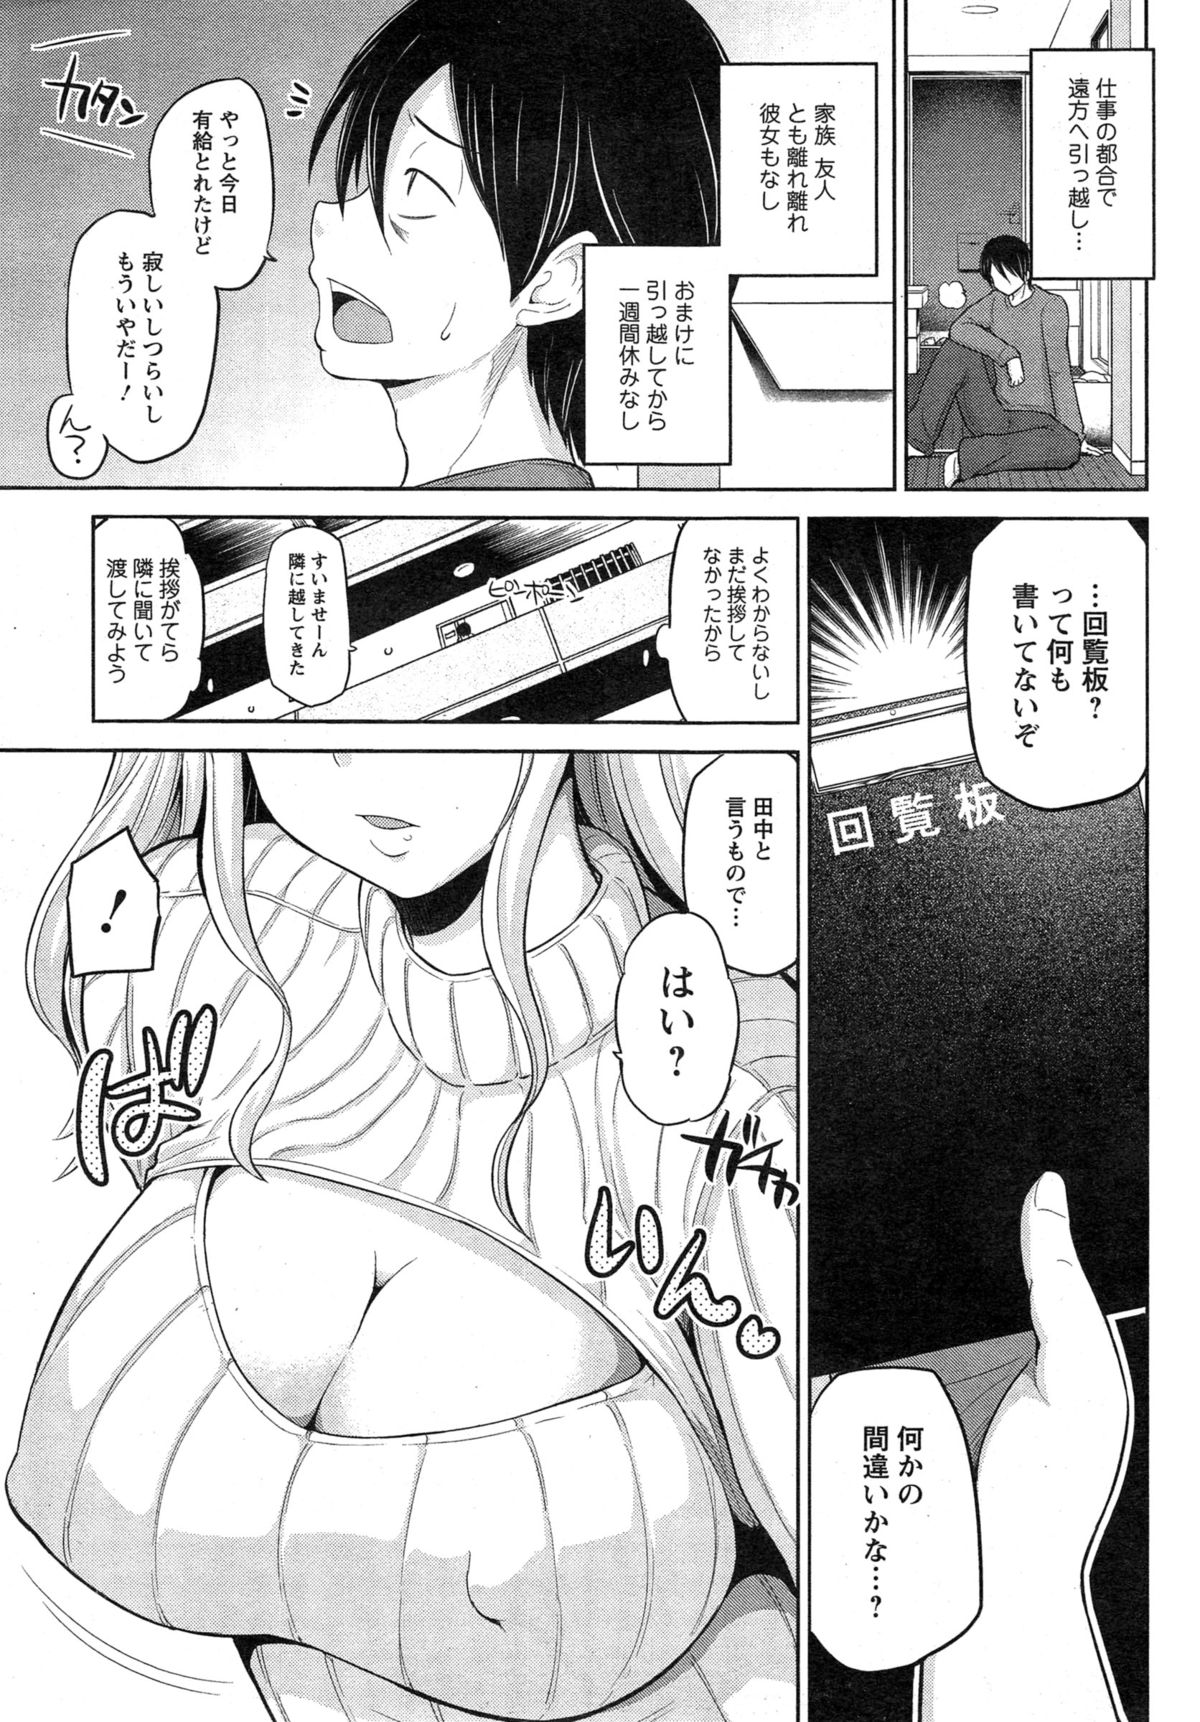 Action Pizazz DX 2015-03 page 25 full